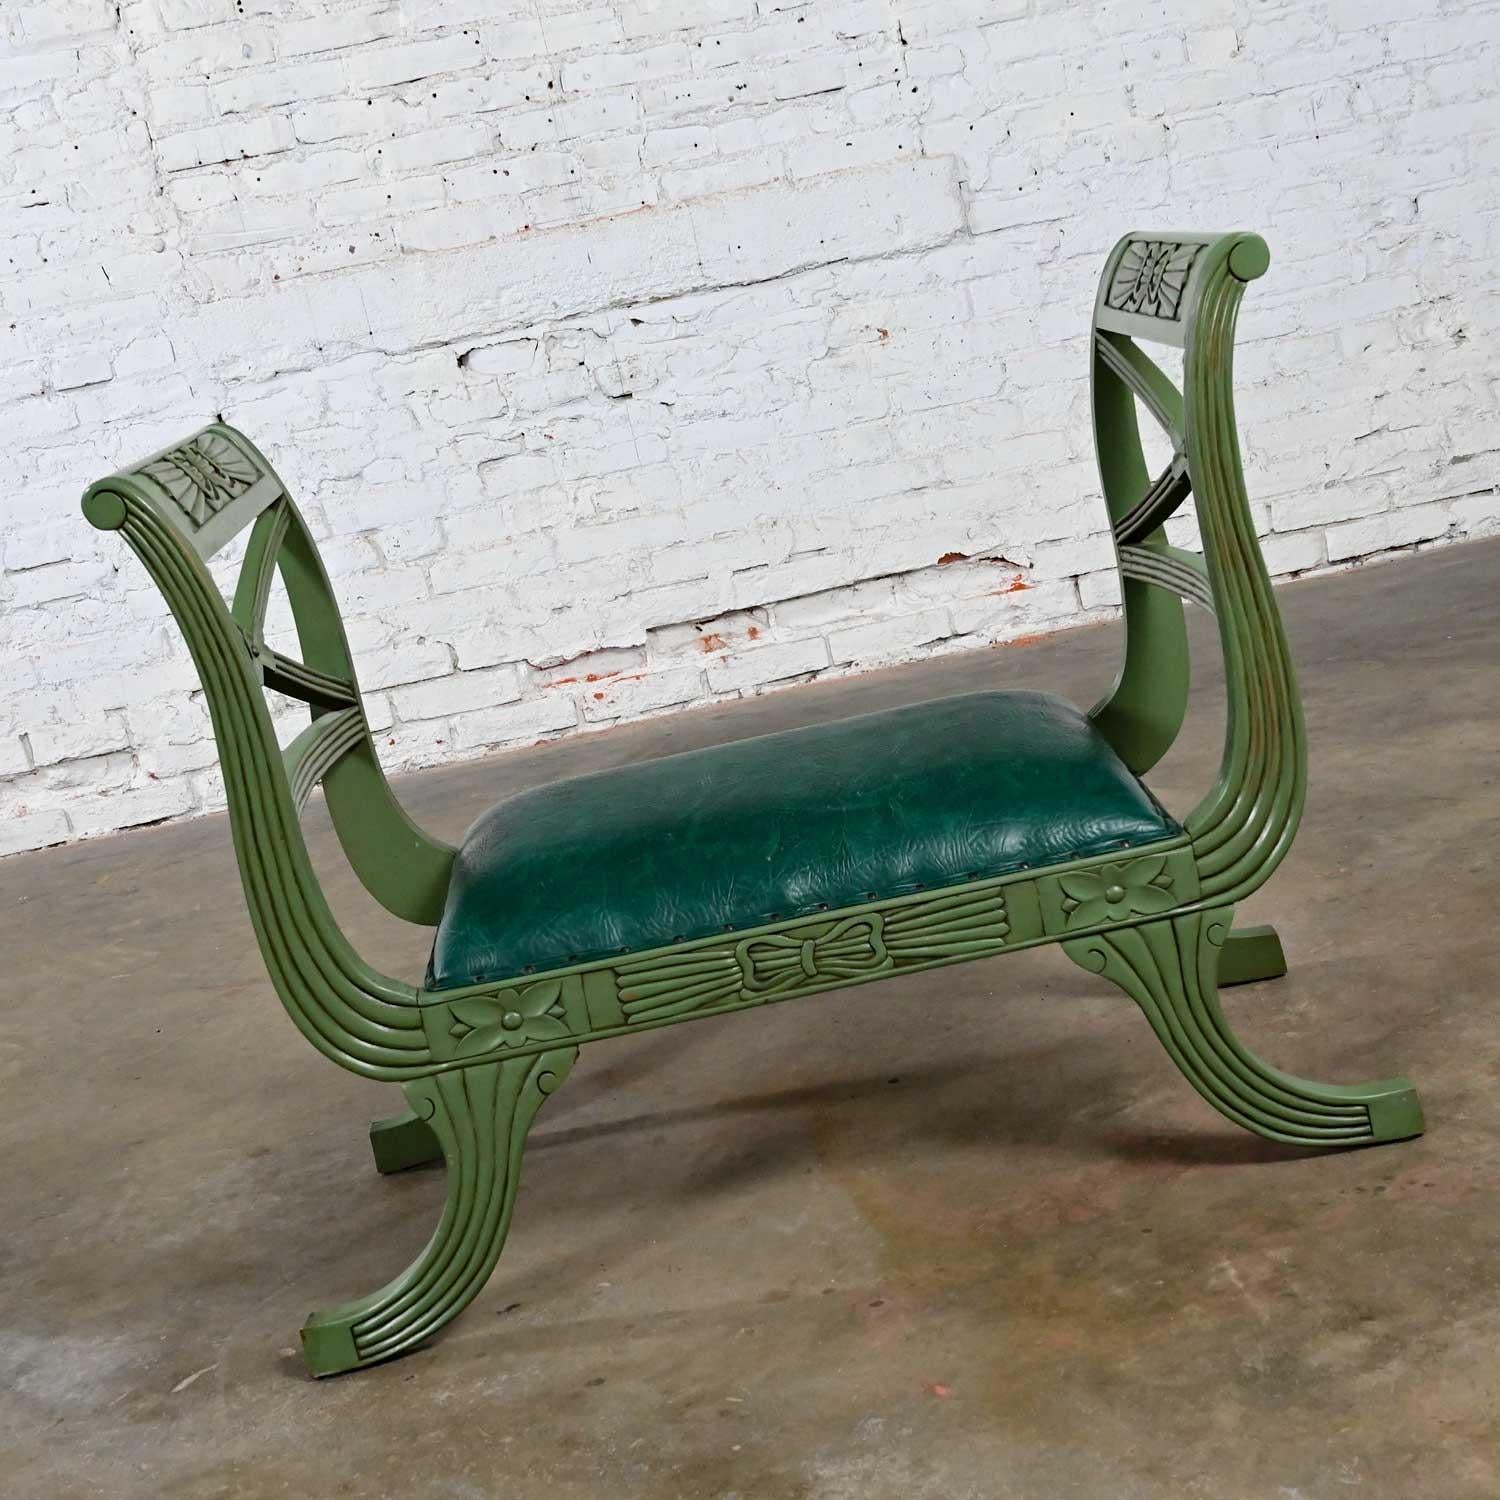 Neoclassical Revival Mid-20th Century Neoclassic Style Hunter Green Faux Leather Short Bench or Stool For Sale